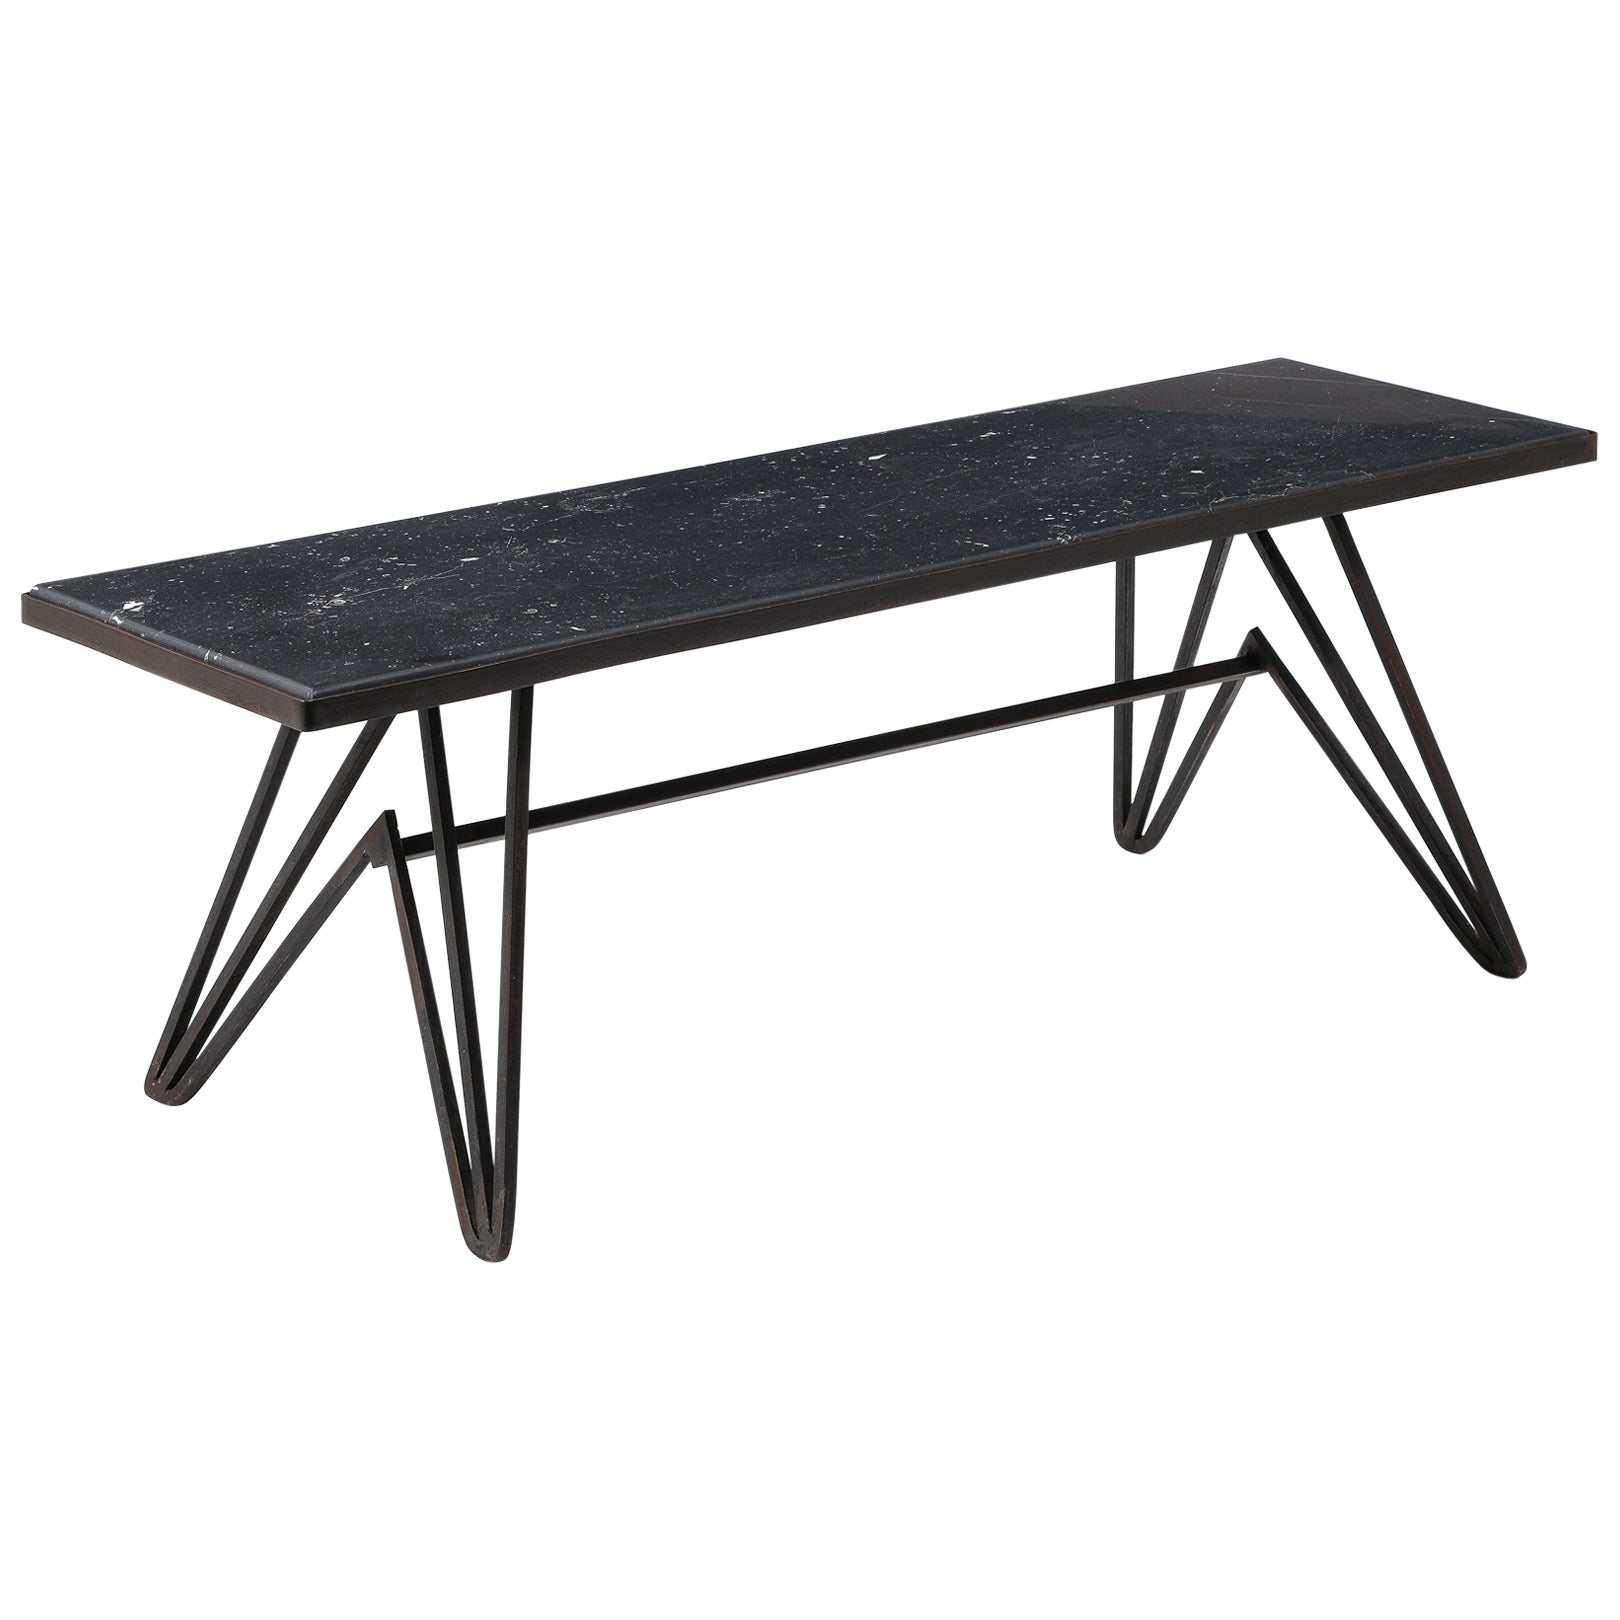 Honed Granite & Wrought Iron Coffee Table, France 1950's